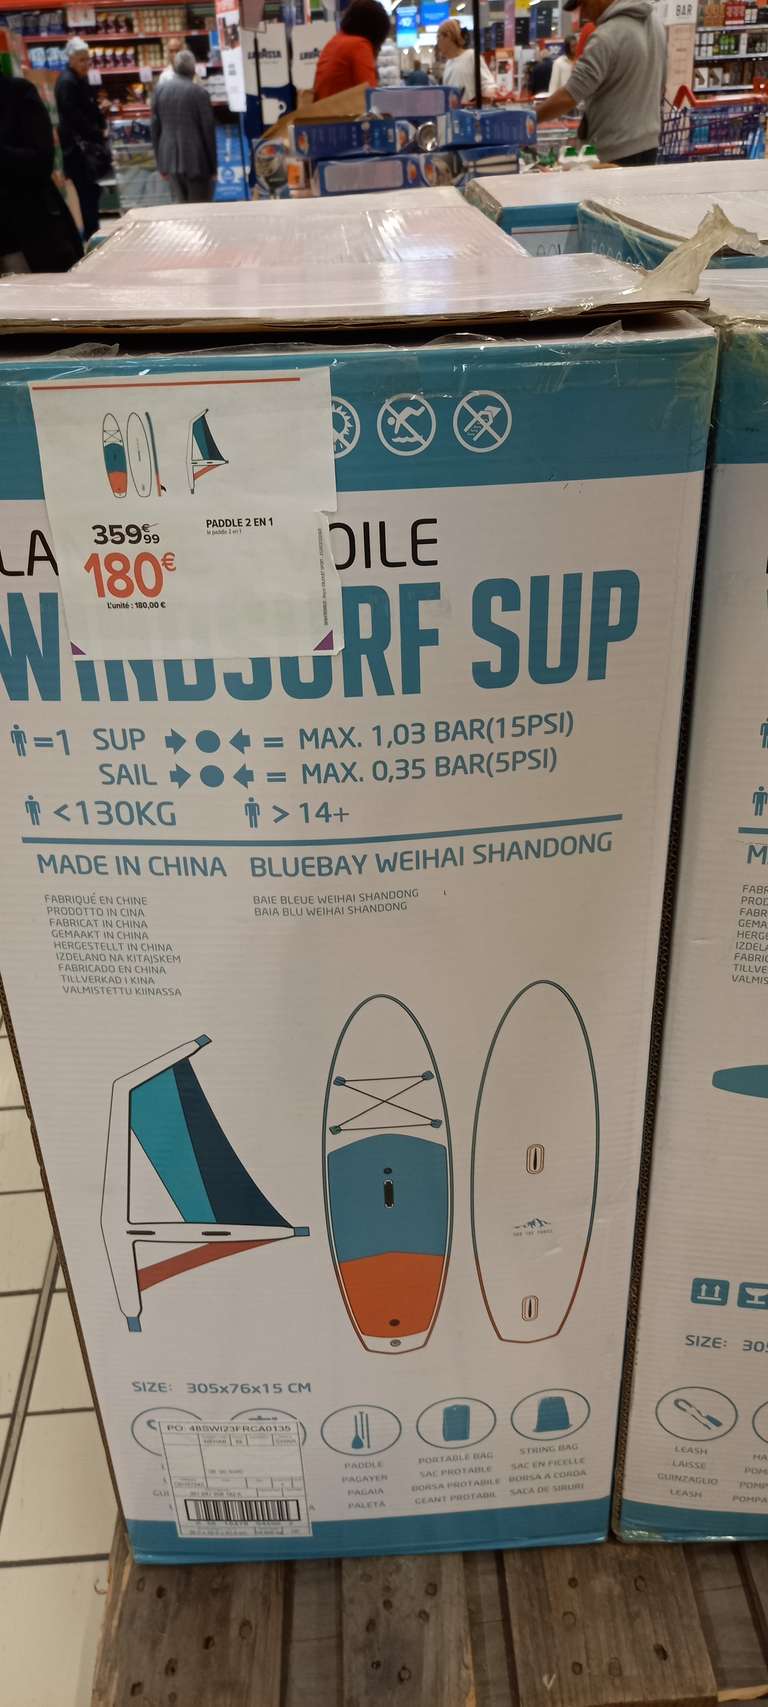 Stand Up Paddle Windsup SUP avec voile gonflable - Carrefour Marseille Le Merlan (13)